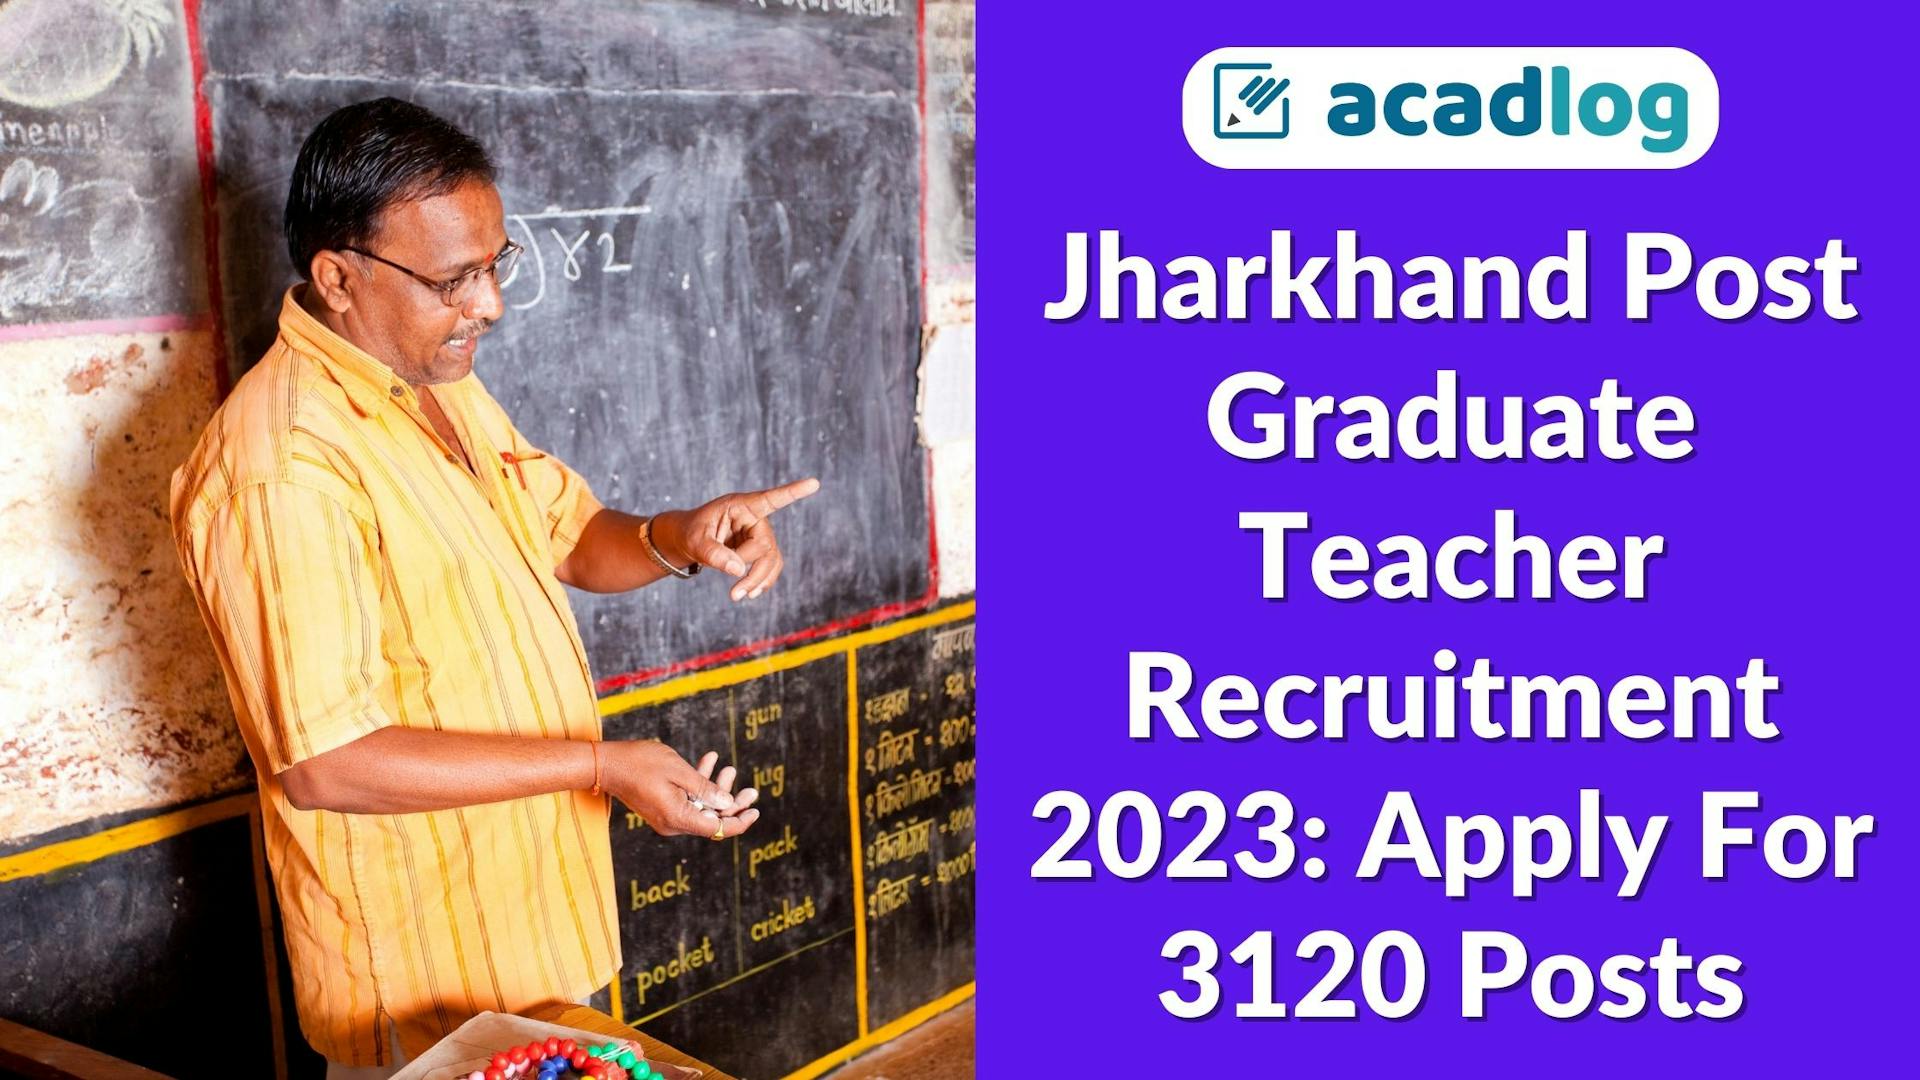 Jharkhand PGT Recruitment 2023: Online Application, Eligibility Criteria, and Selection Process